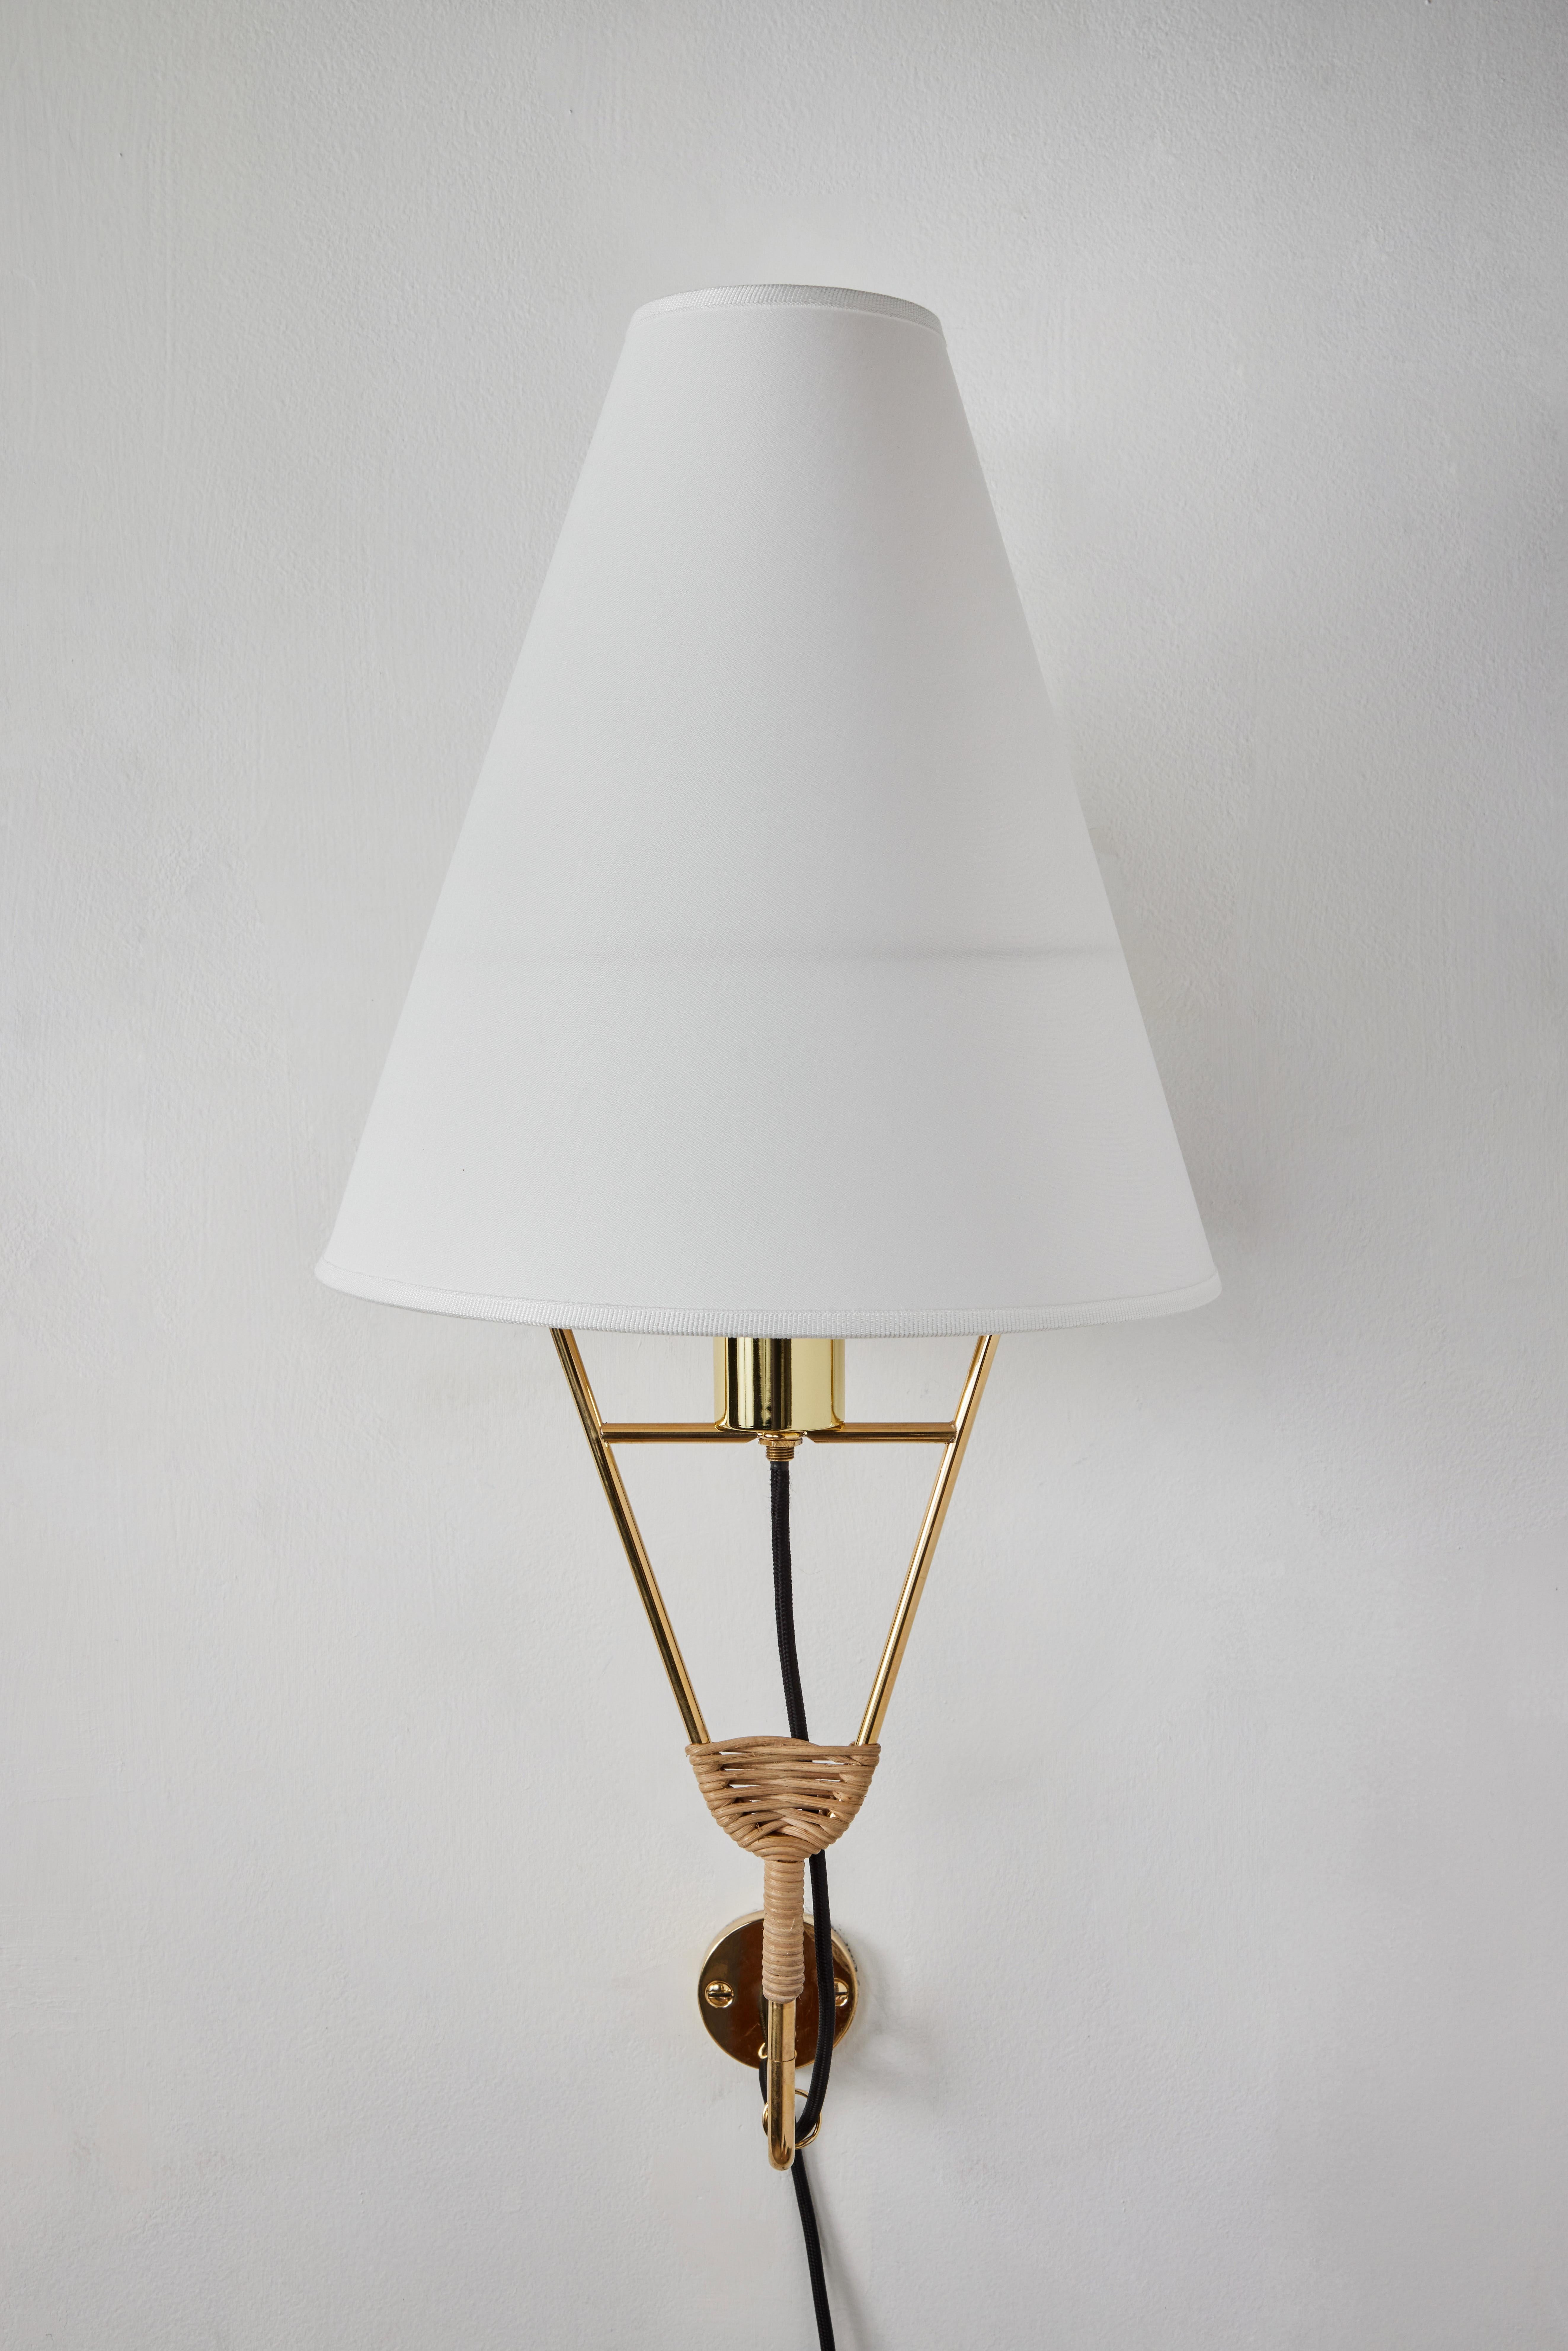 Large Carl Auböck 'Vice Versa' Wall Lamp In New Condition For Sale In Glendale, CA